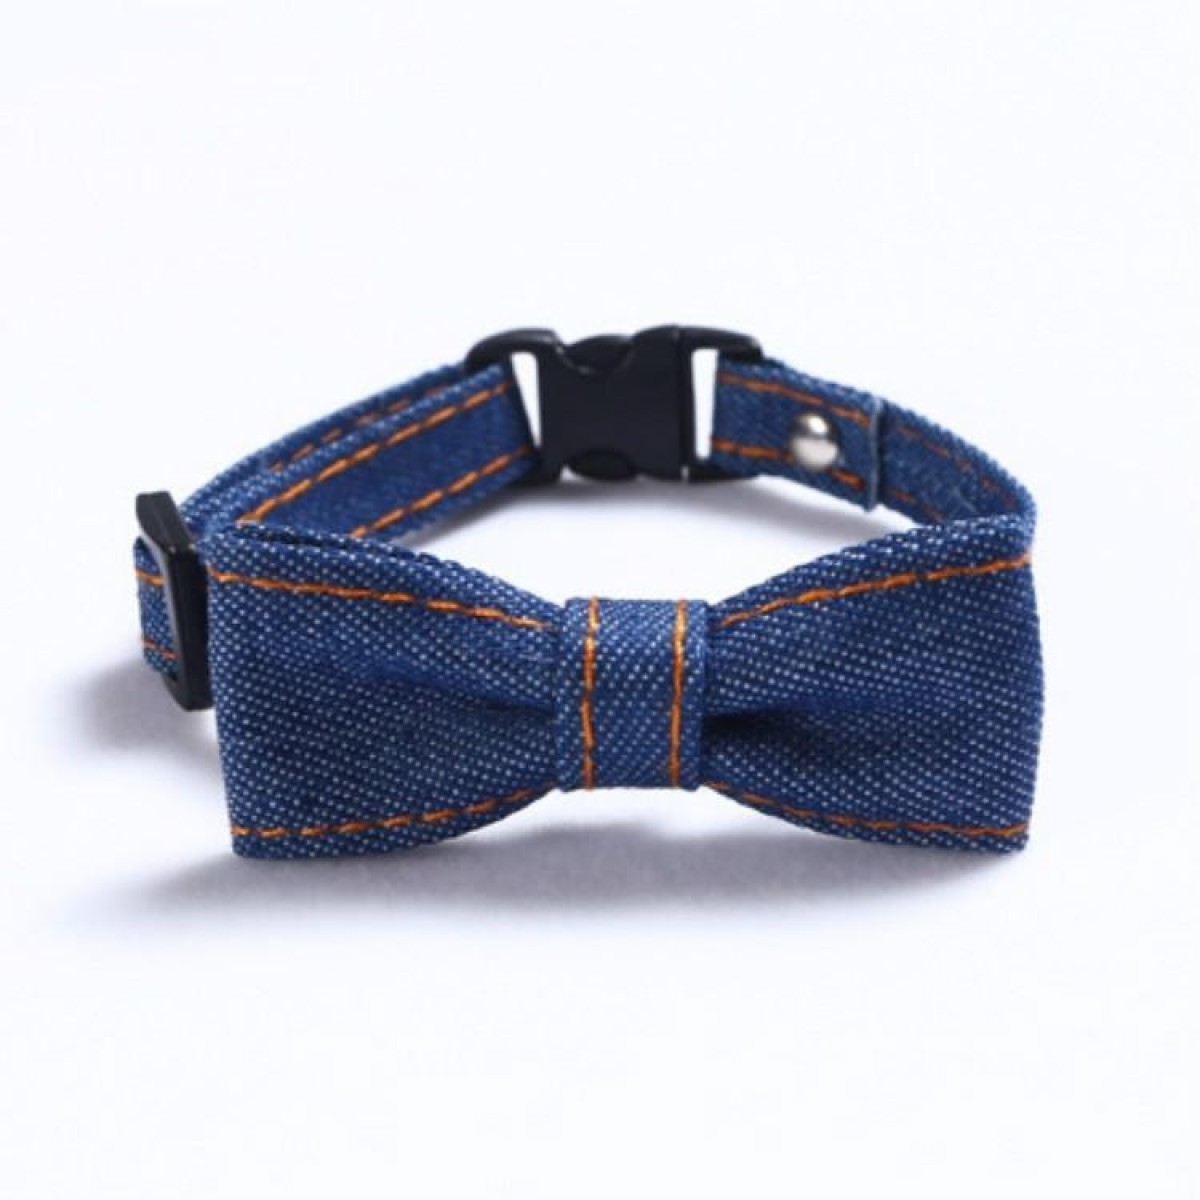 Pet Cowboy Bow Tie Collar Cats Dogs Adjustable Tie Collars Pet Accessories Supplies, Size:S 16-32cm, Style:Big Bowknot(Dark Blue)